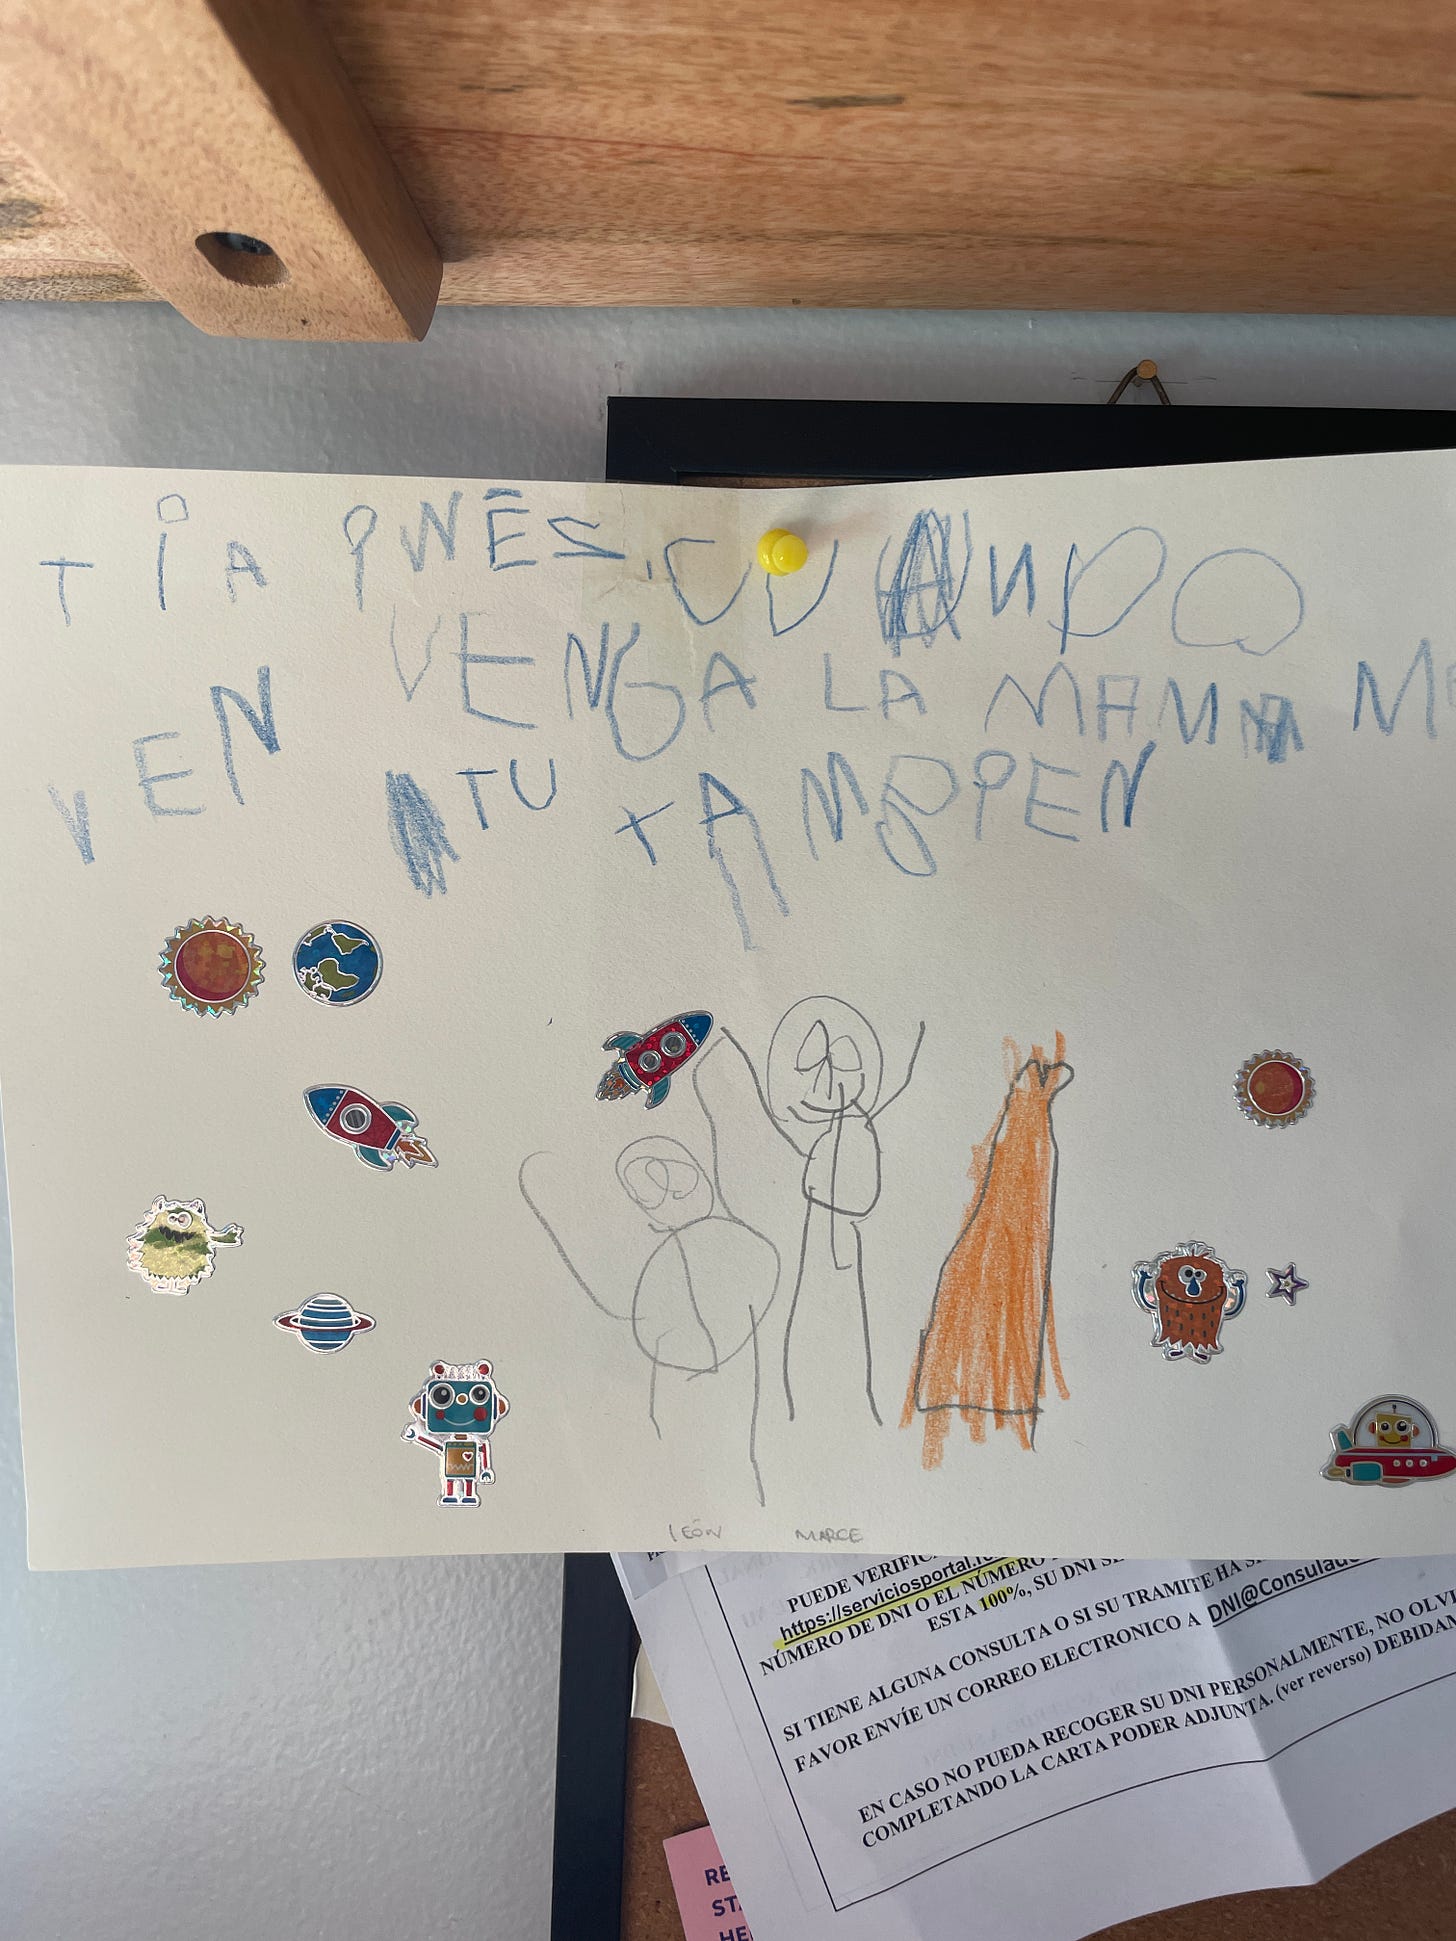 Get well card showing two kids, lots of space-themed stickers and a message asking me to go back to Lima